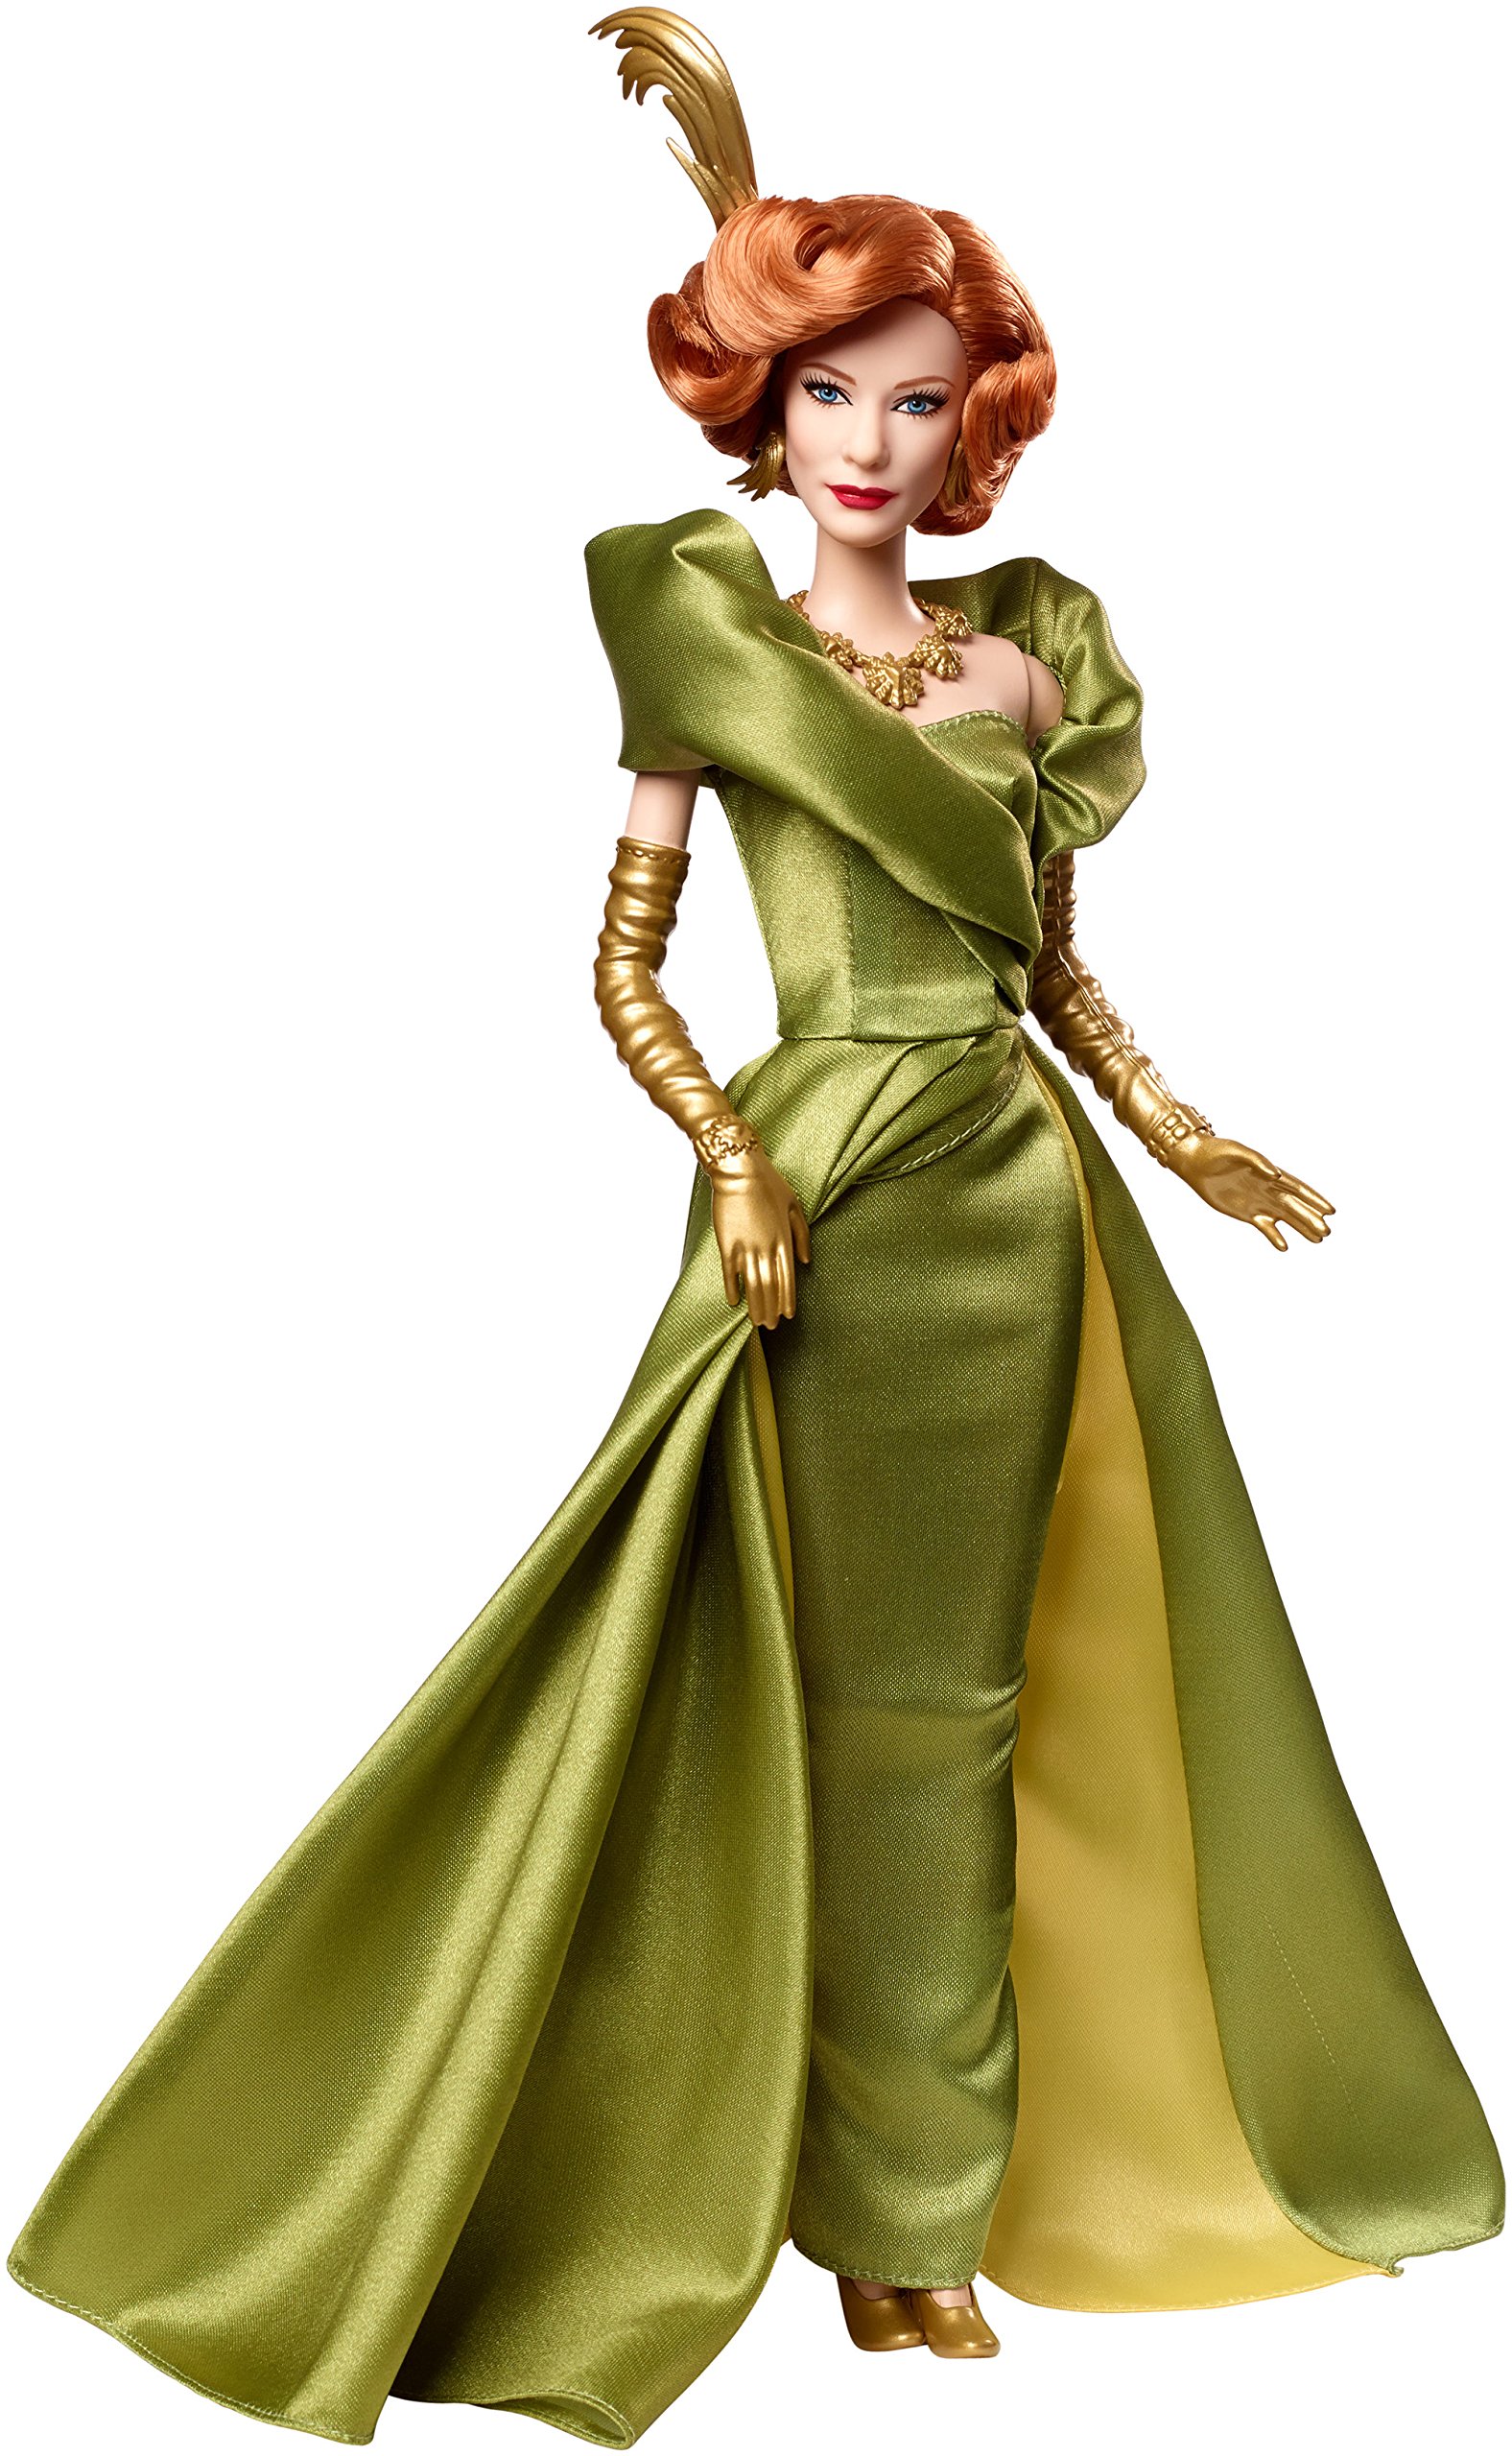 Cinderella Barbie 2015 Movie Dolls Released - Lady Tremaine the Stepmother